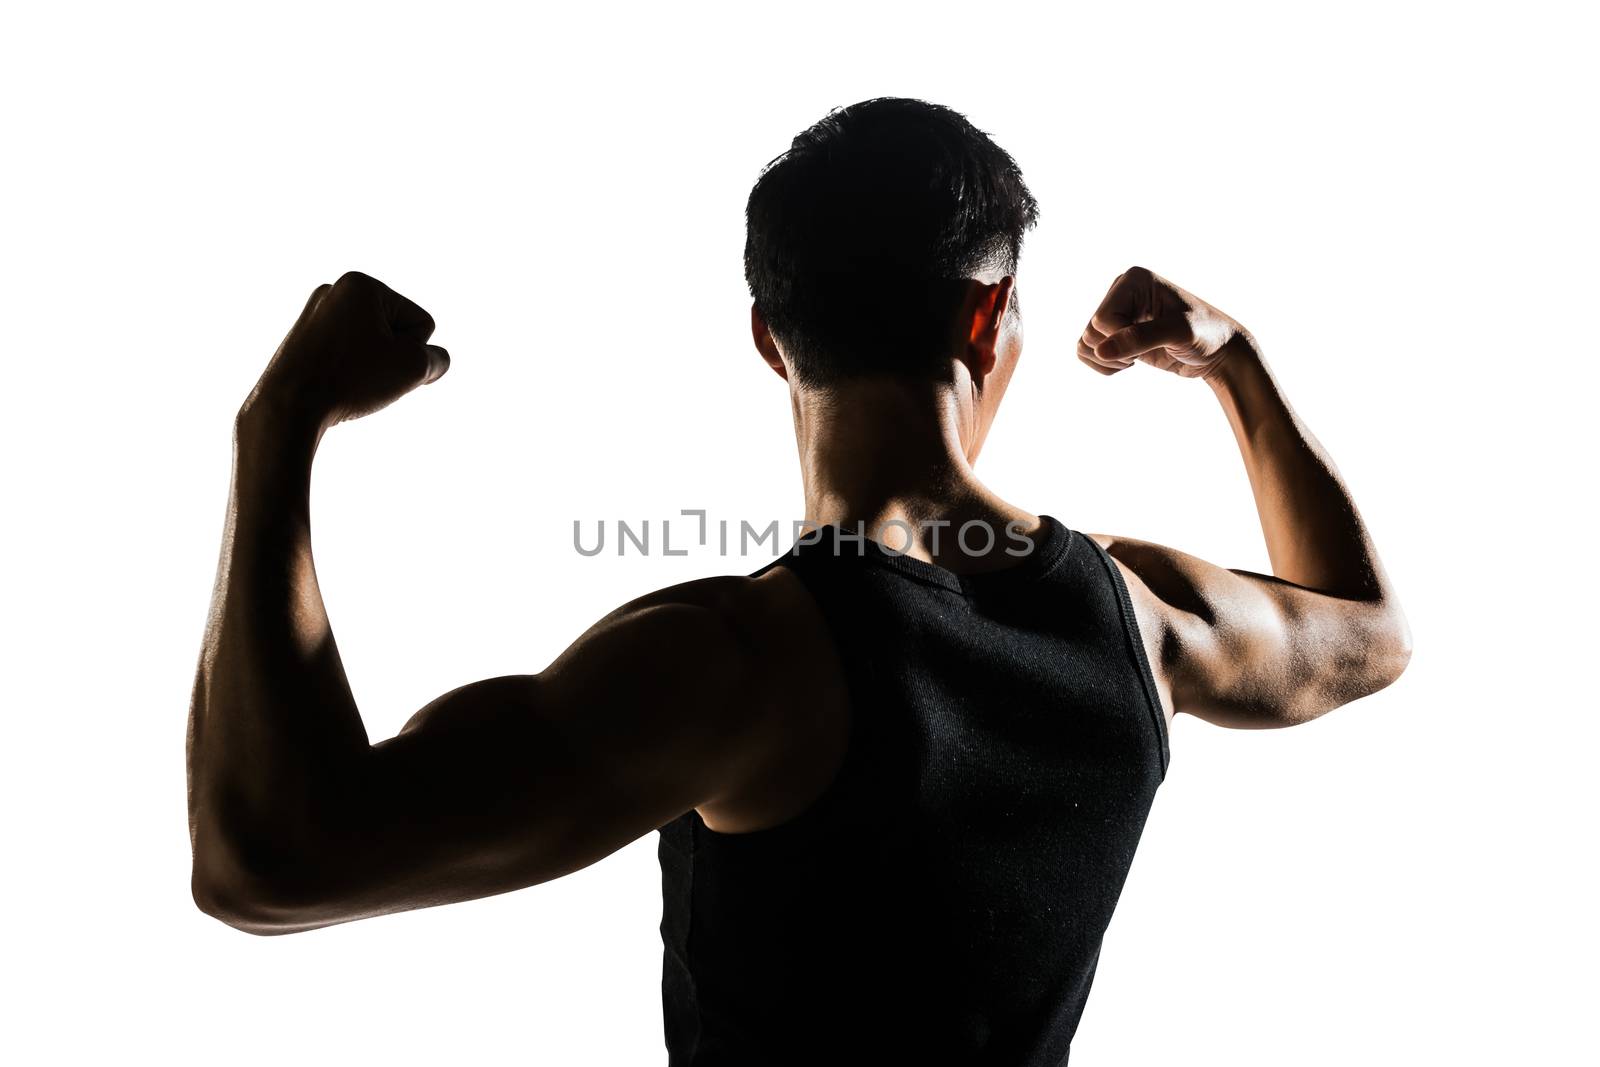 Rear view of healthy muscular young man with his arms stretched out isolated on white background.